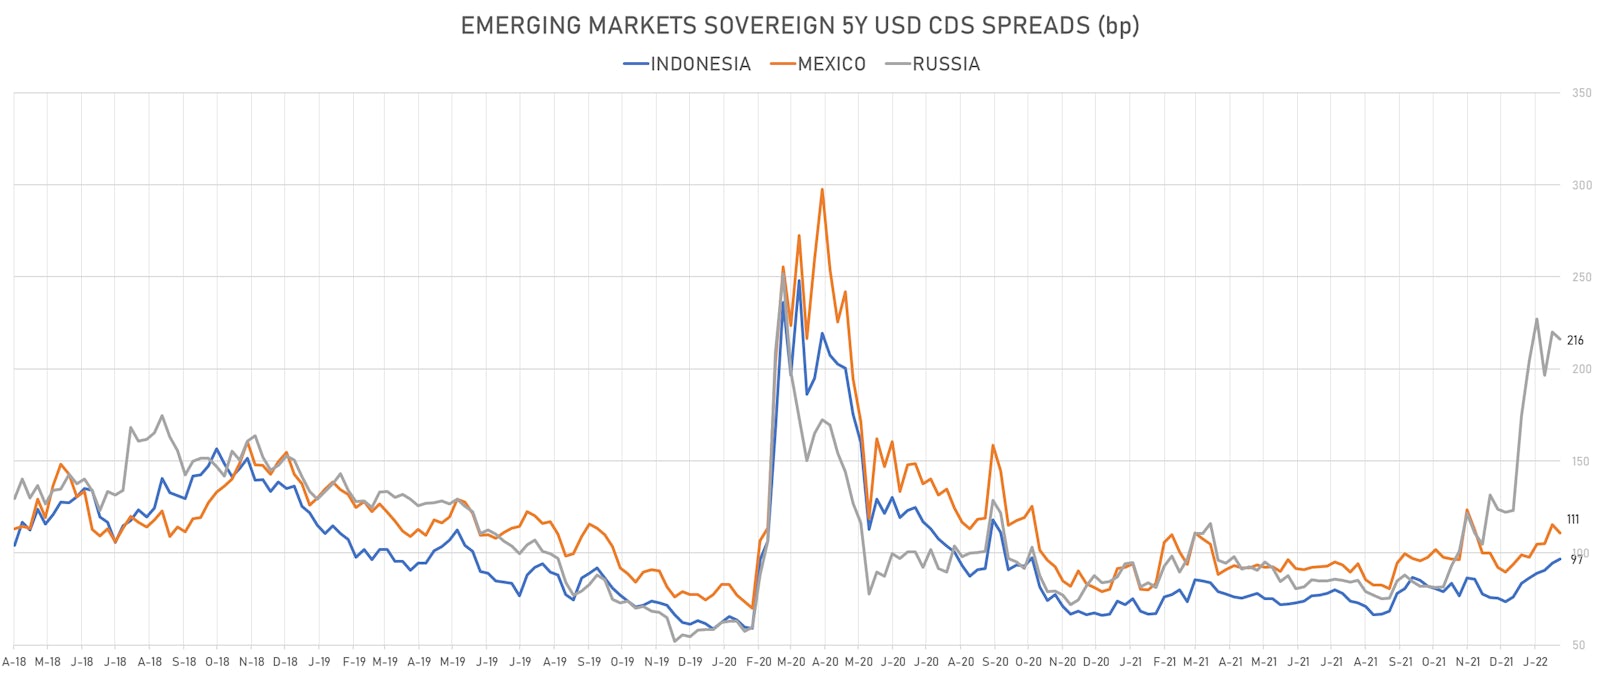 Sovereign 5Y USD CDS Spreads for Indonesia, Mexico and Russia | Sources: ϕpost, Refinitiv data